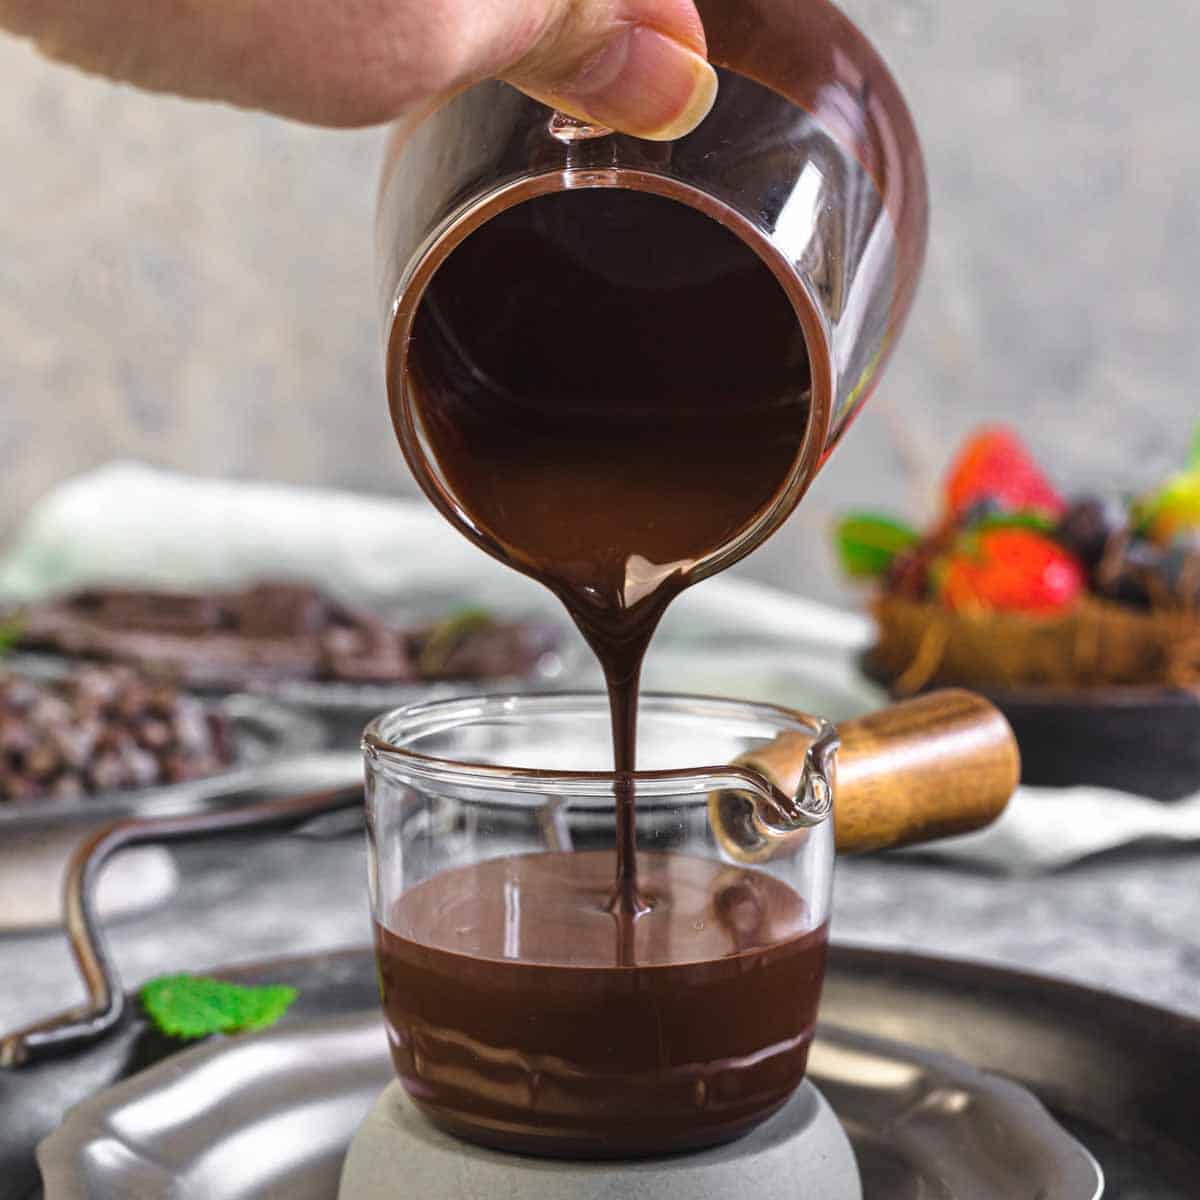 Sugar-Free Chocolate Magic Shell Recipe pouring melted chocolate into a glass cup